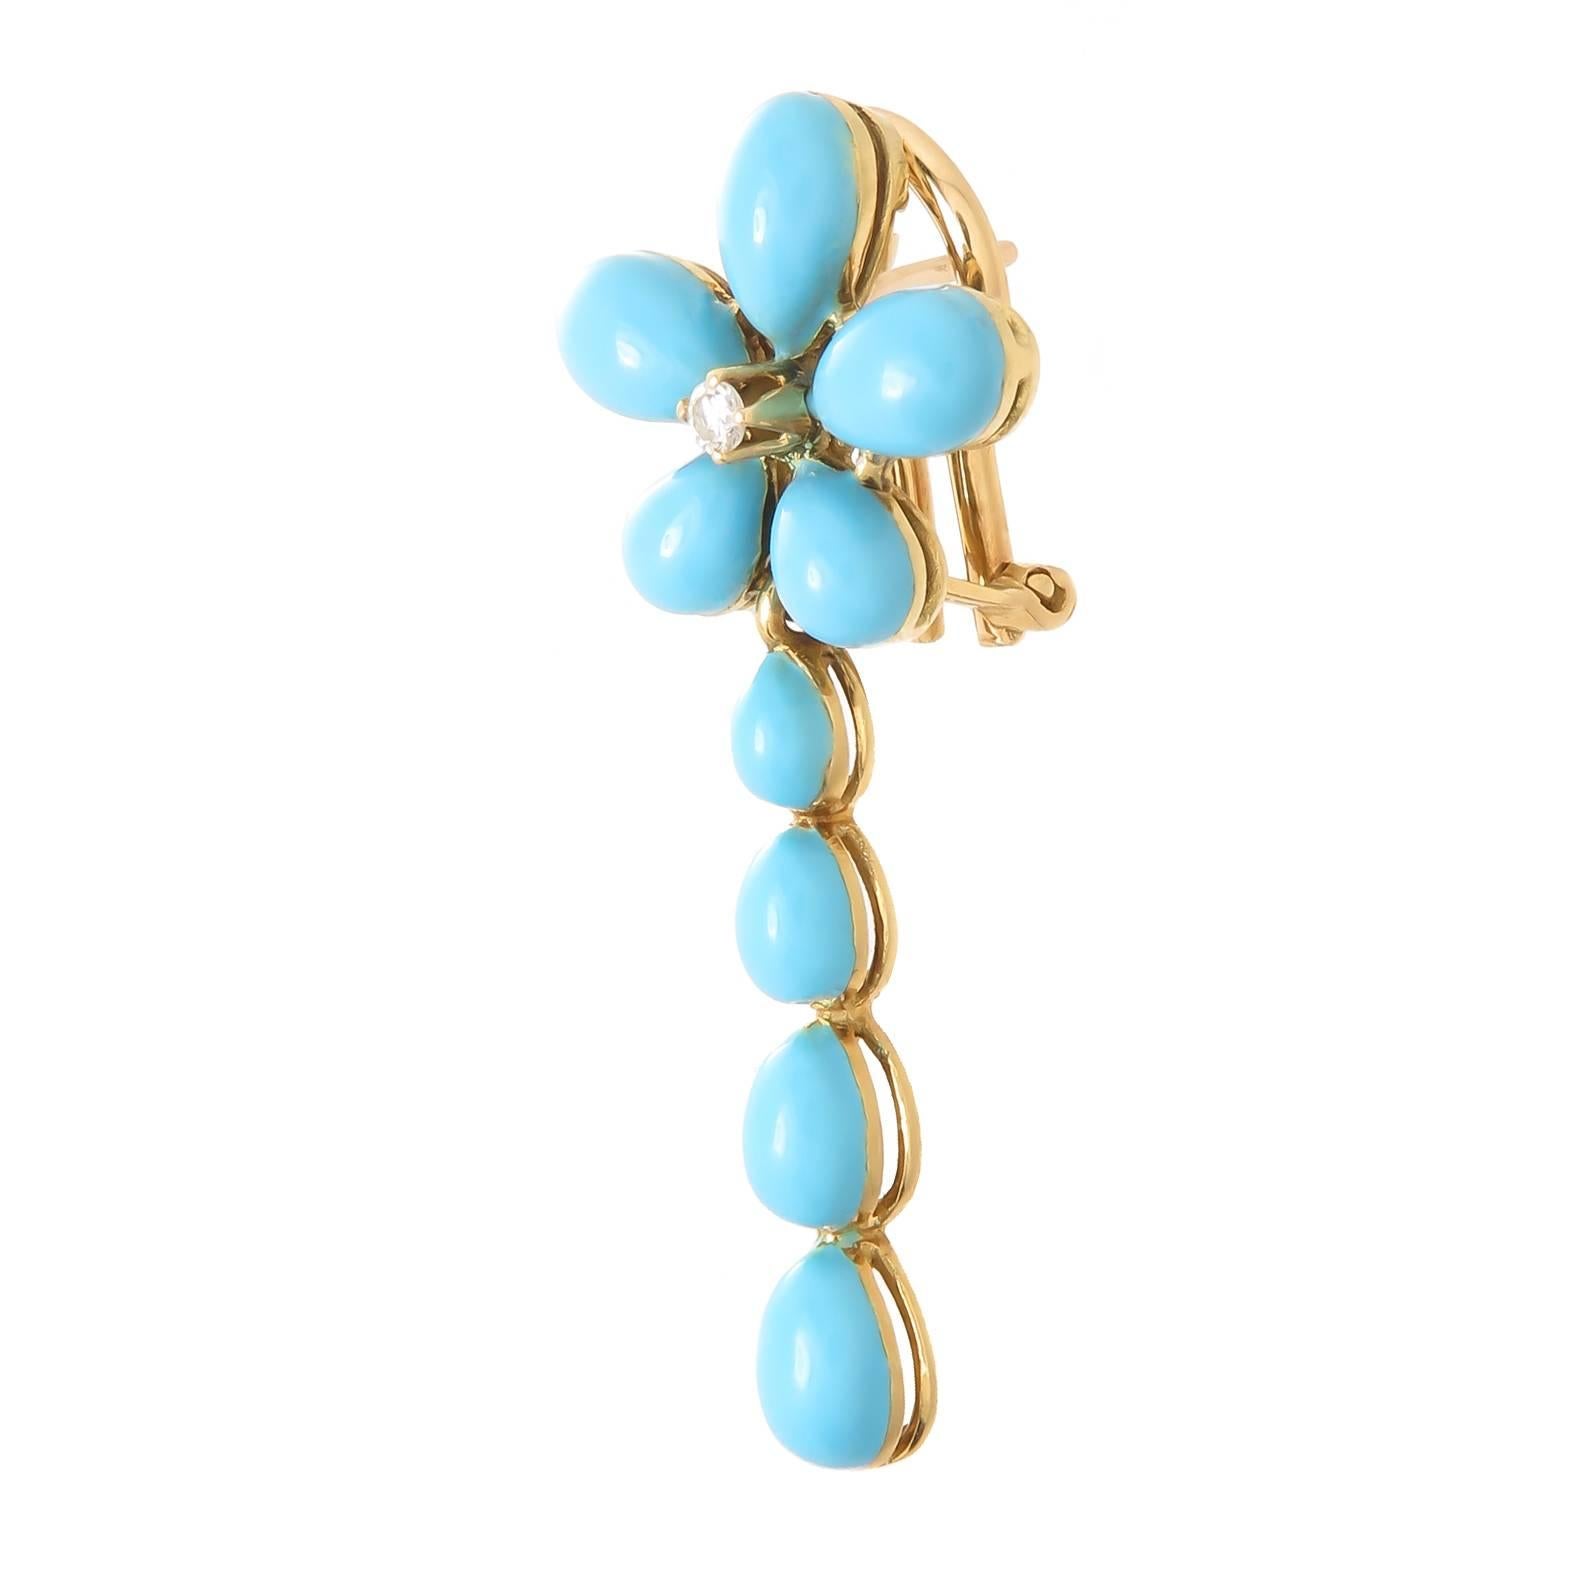 Circa 1970s Cartier 18K yellow Gold and Blue Enamel Dangle Earrings. Designed as a Flower with a dangle drop measuring 1 1/2 inch in length the Blue Enamel looks like Turquoise stones, centrally set with a .03 Carat Diamond. These have an Omega clip